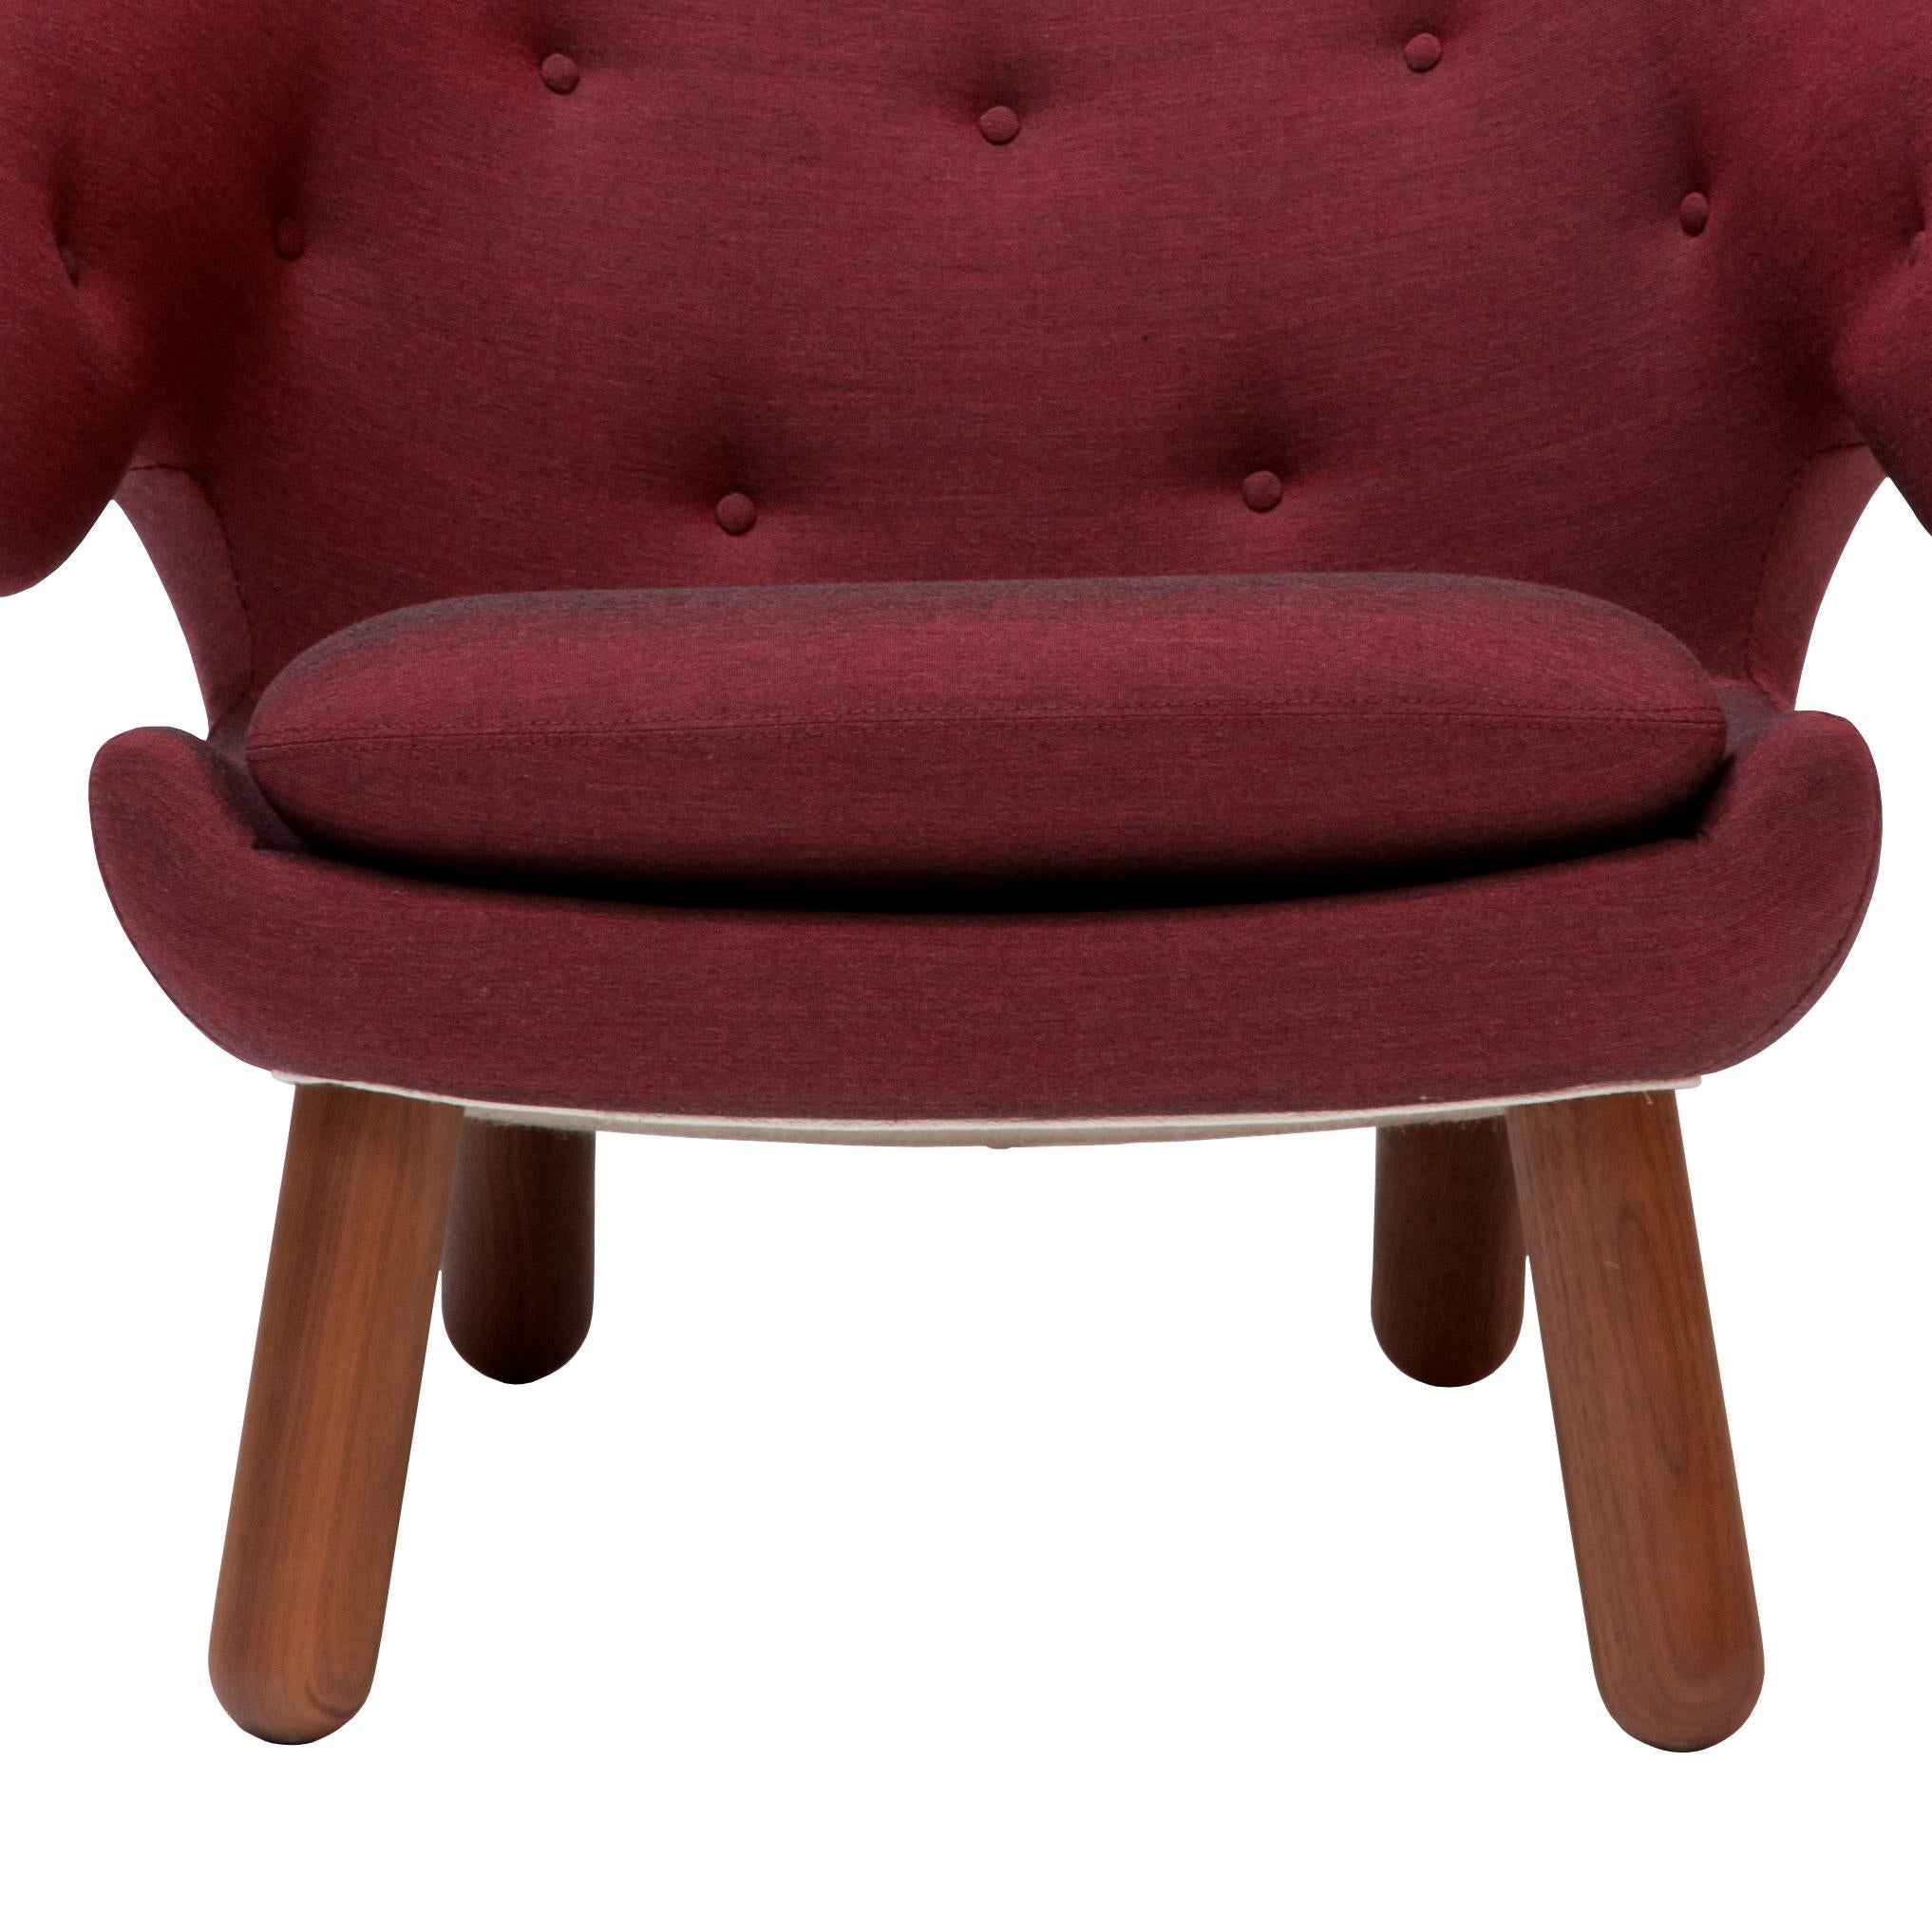 Contemporary Set of Two Pelican Chairs in Garnet Kvadrat Remix and Wood by Finn Juhl